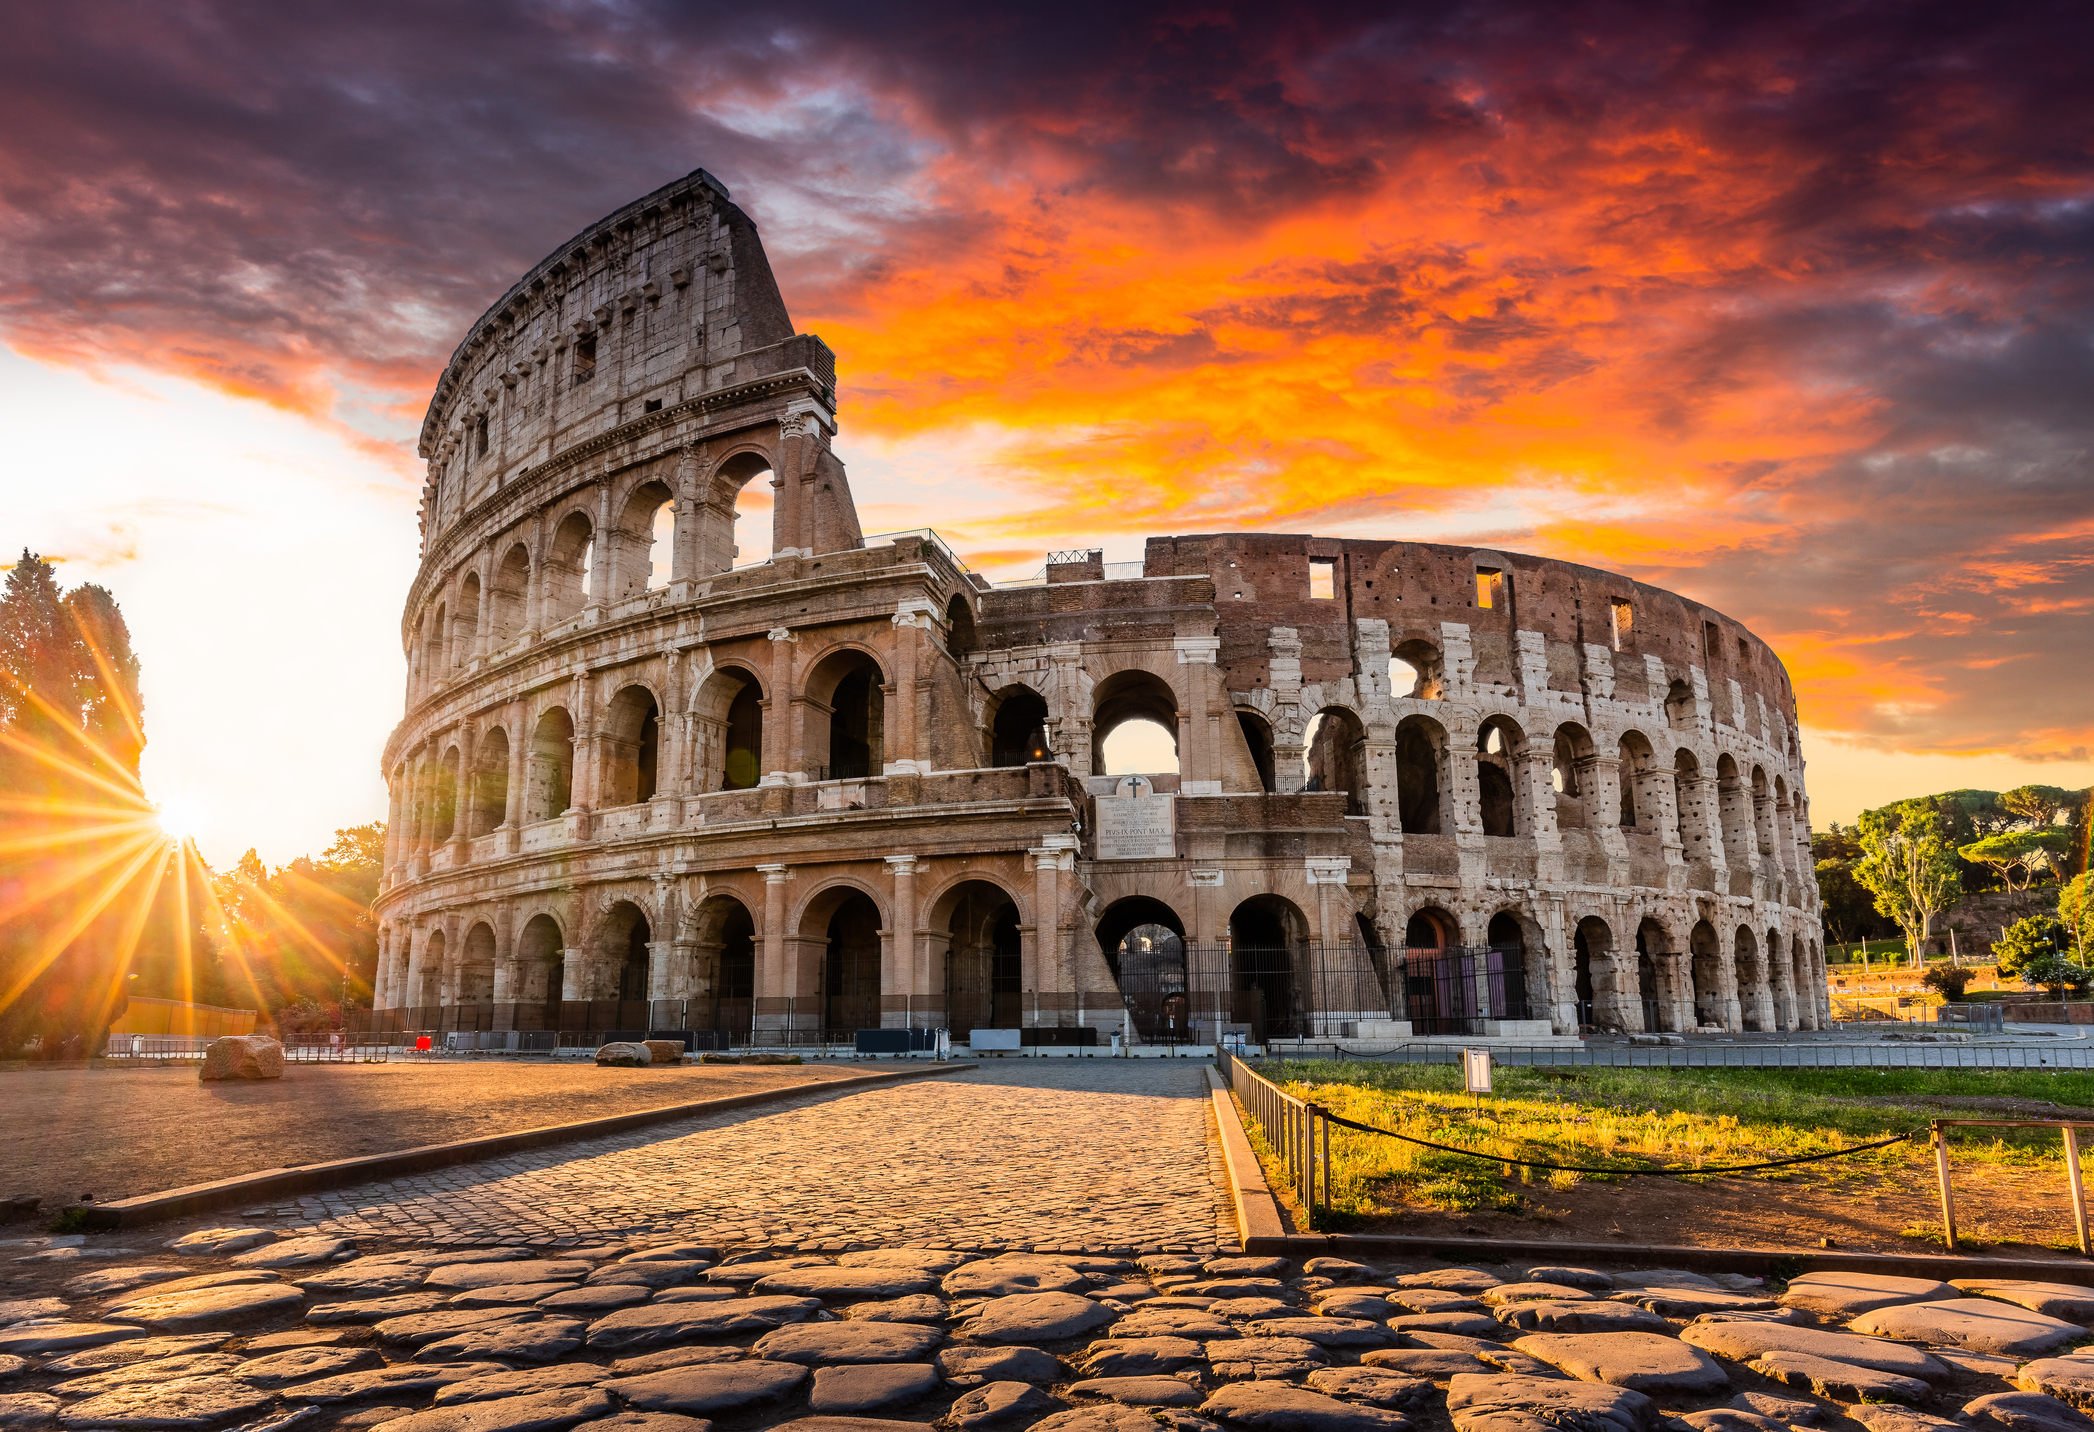 7-night, 3-city Italy travel package with air & rail from $648 per person